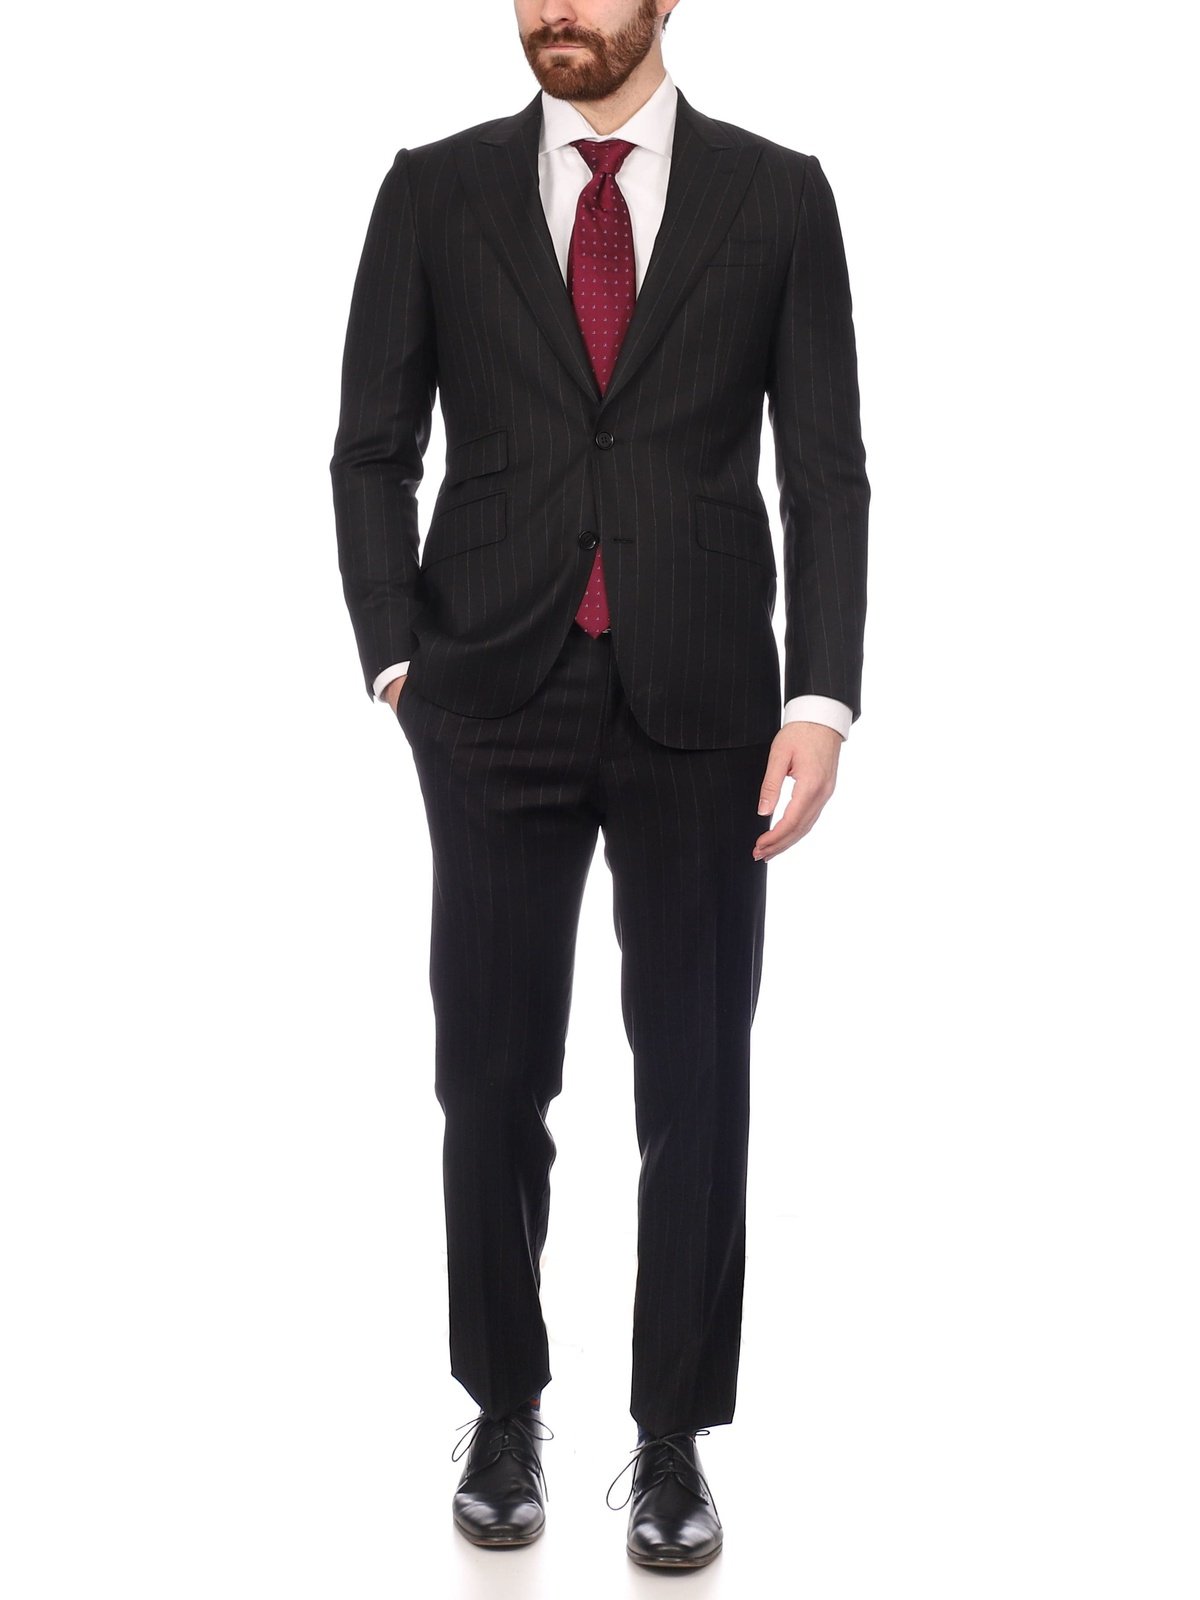 White Slim Fit Suit for Men Italian Style Tight Fitted Vinci SC900-12